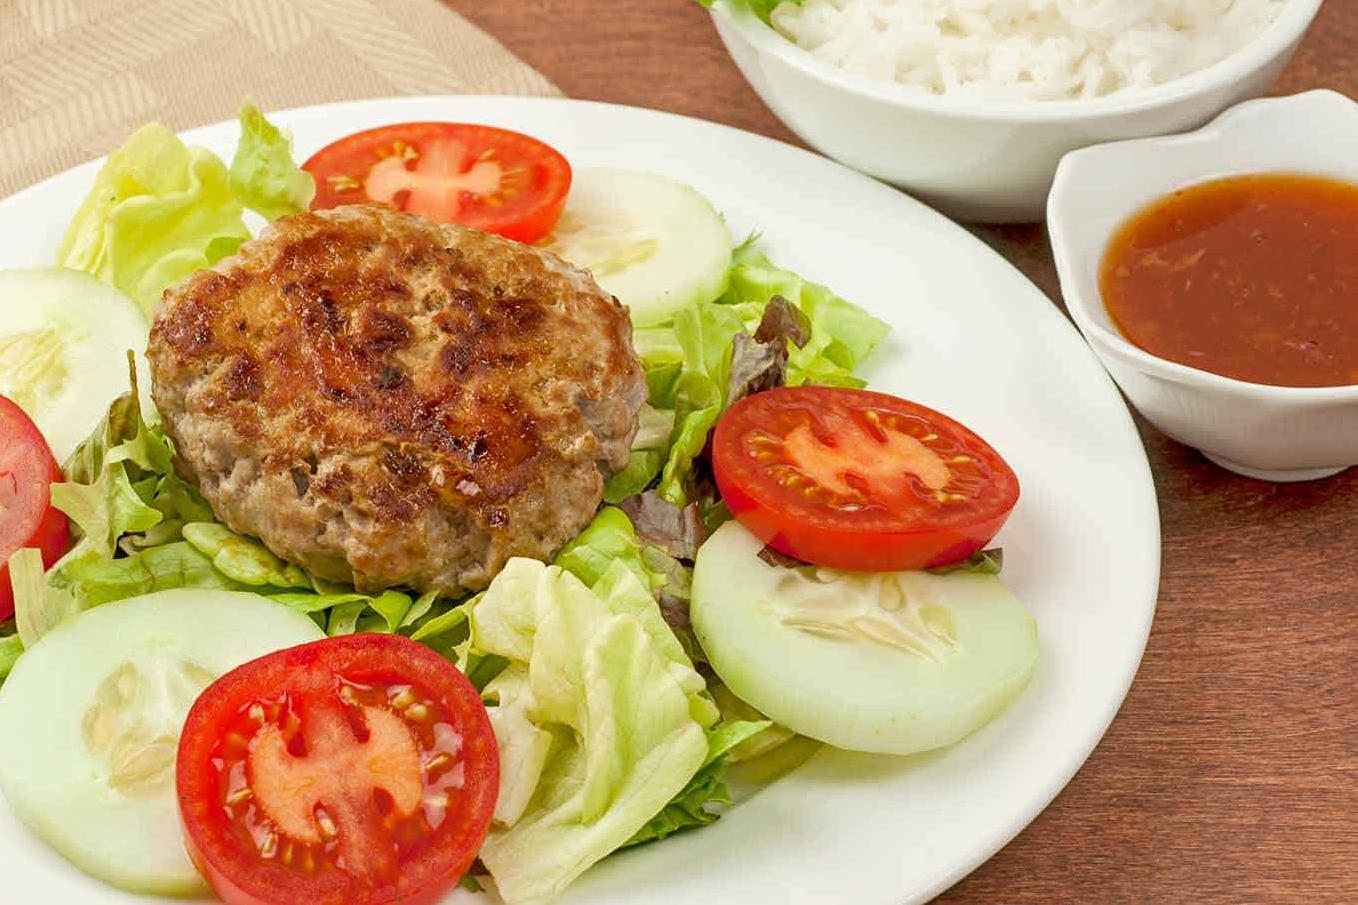  You won't be able to resist these Vietnamese pork patties